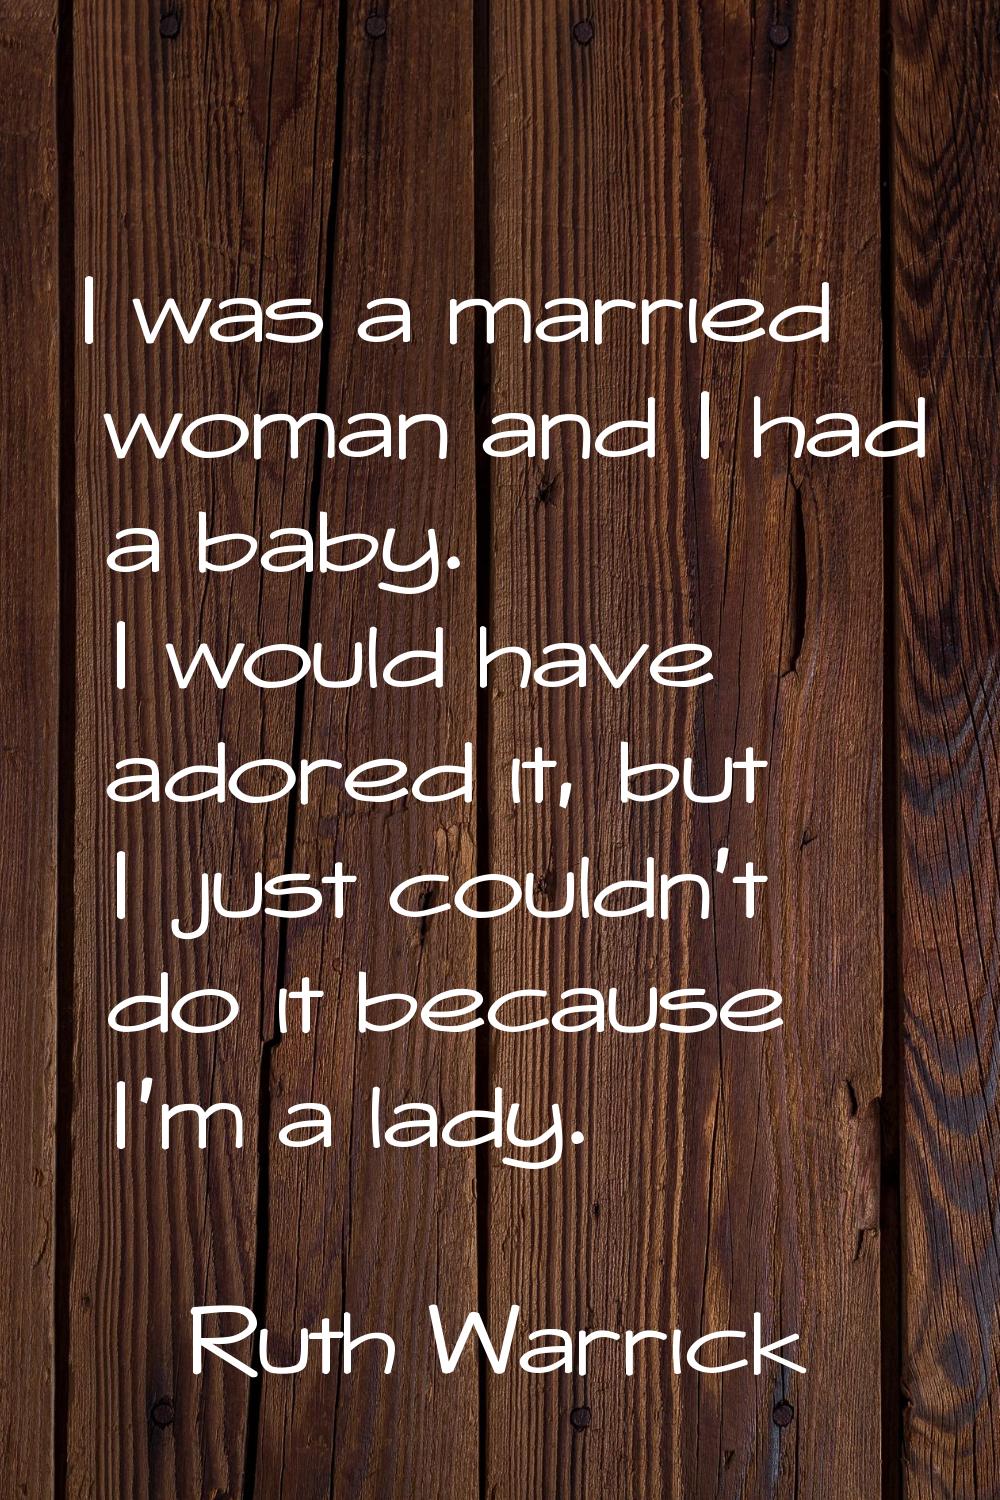 I was a married woman and I had a baby. I would have adored it, but I just couldn't do it because I